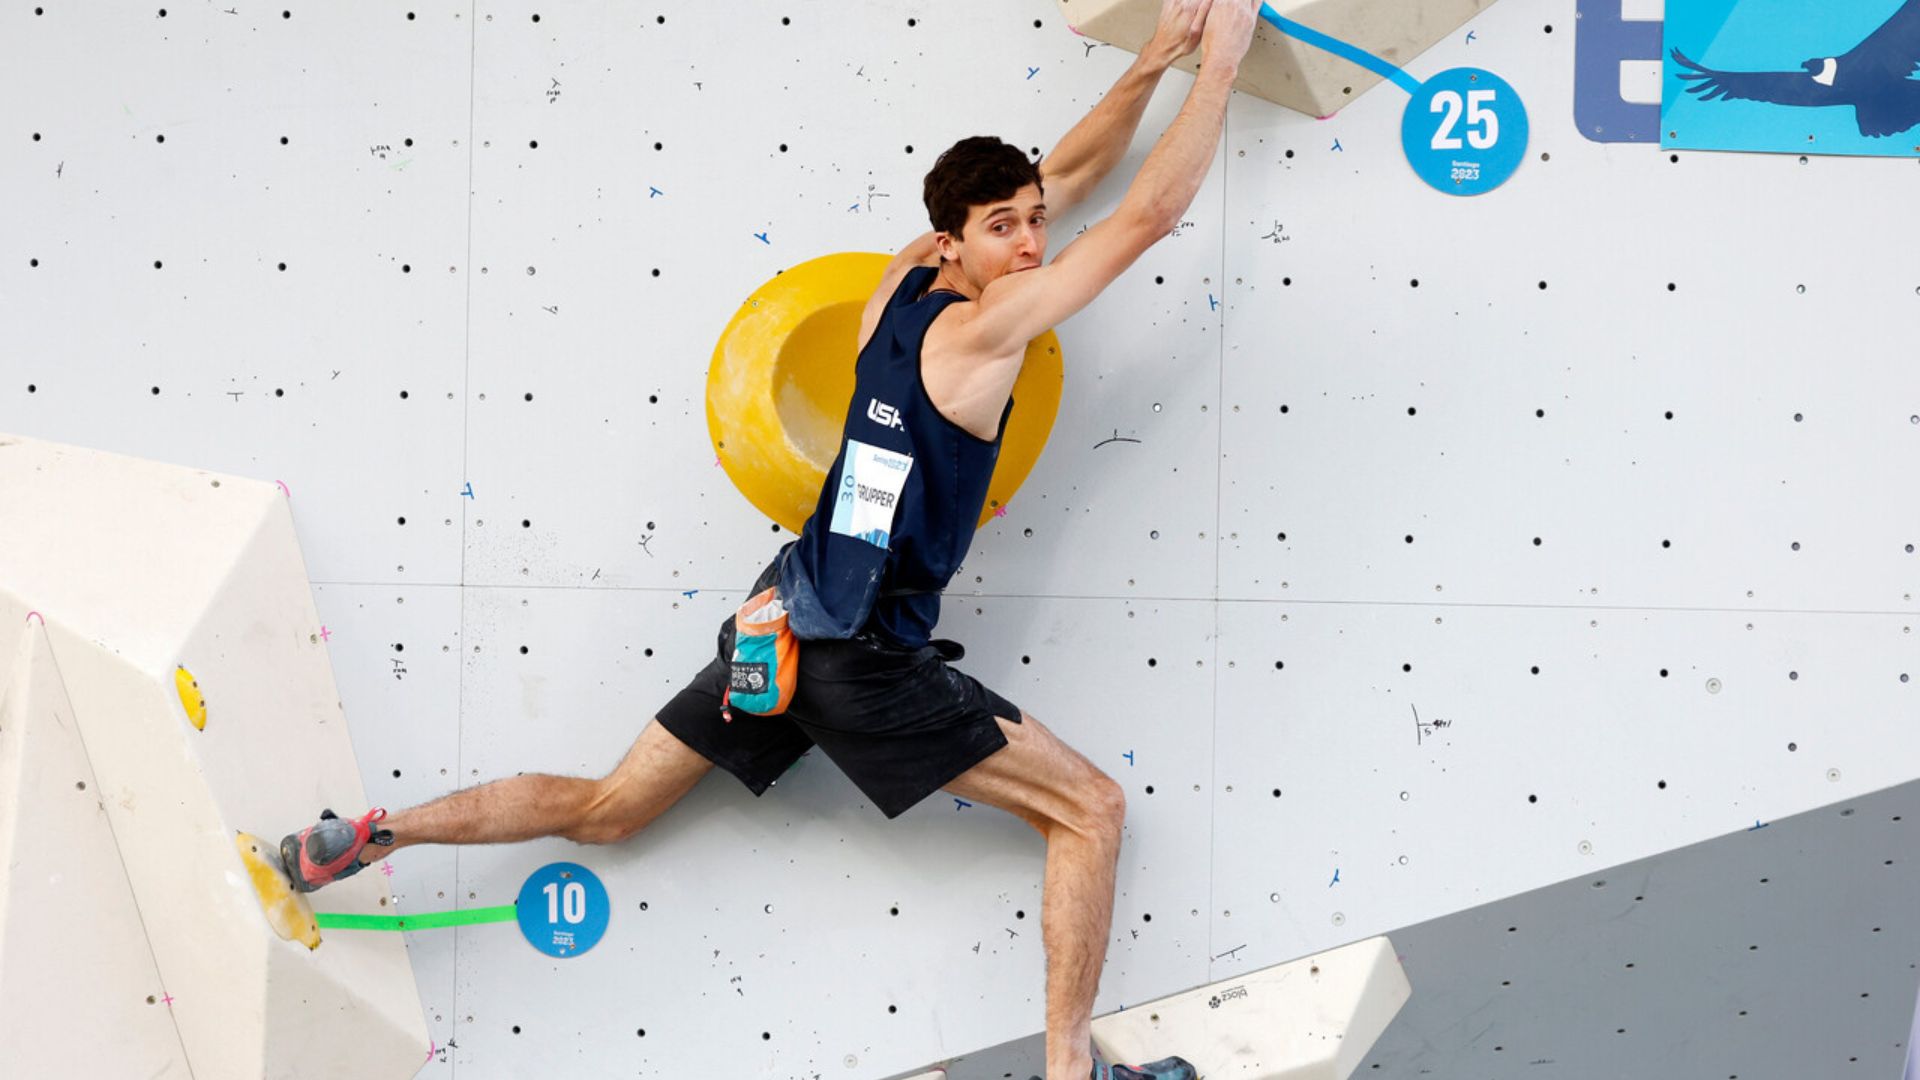 United States dominates in climbing, and Grupper secures a spot in Paris 2024